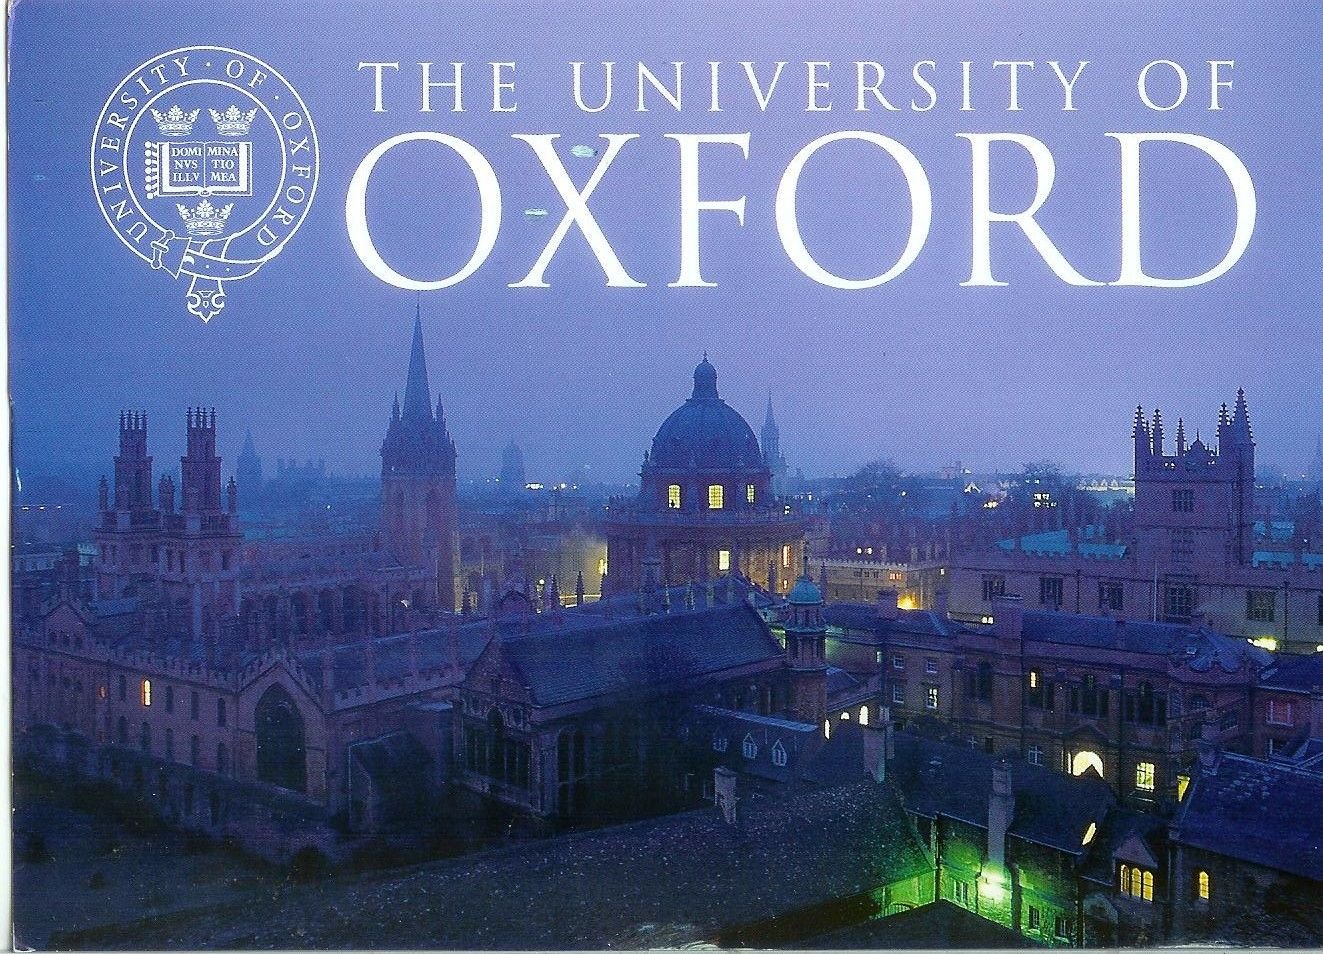 Oxford picture. Оксфорд университет. Оксфордский университет 1117. Английский университет Оксфорд. Сити-оф-Оксфорд университет.